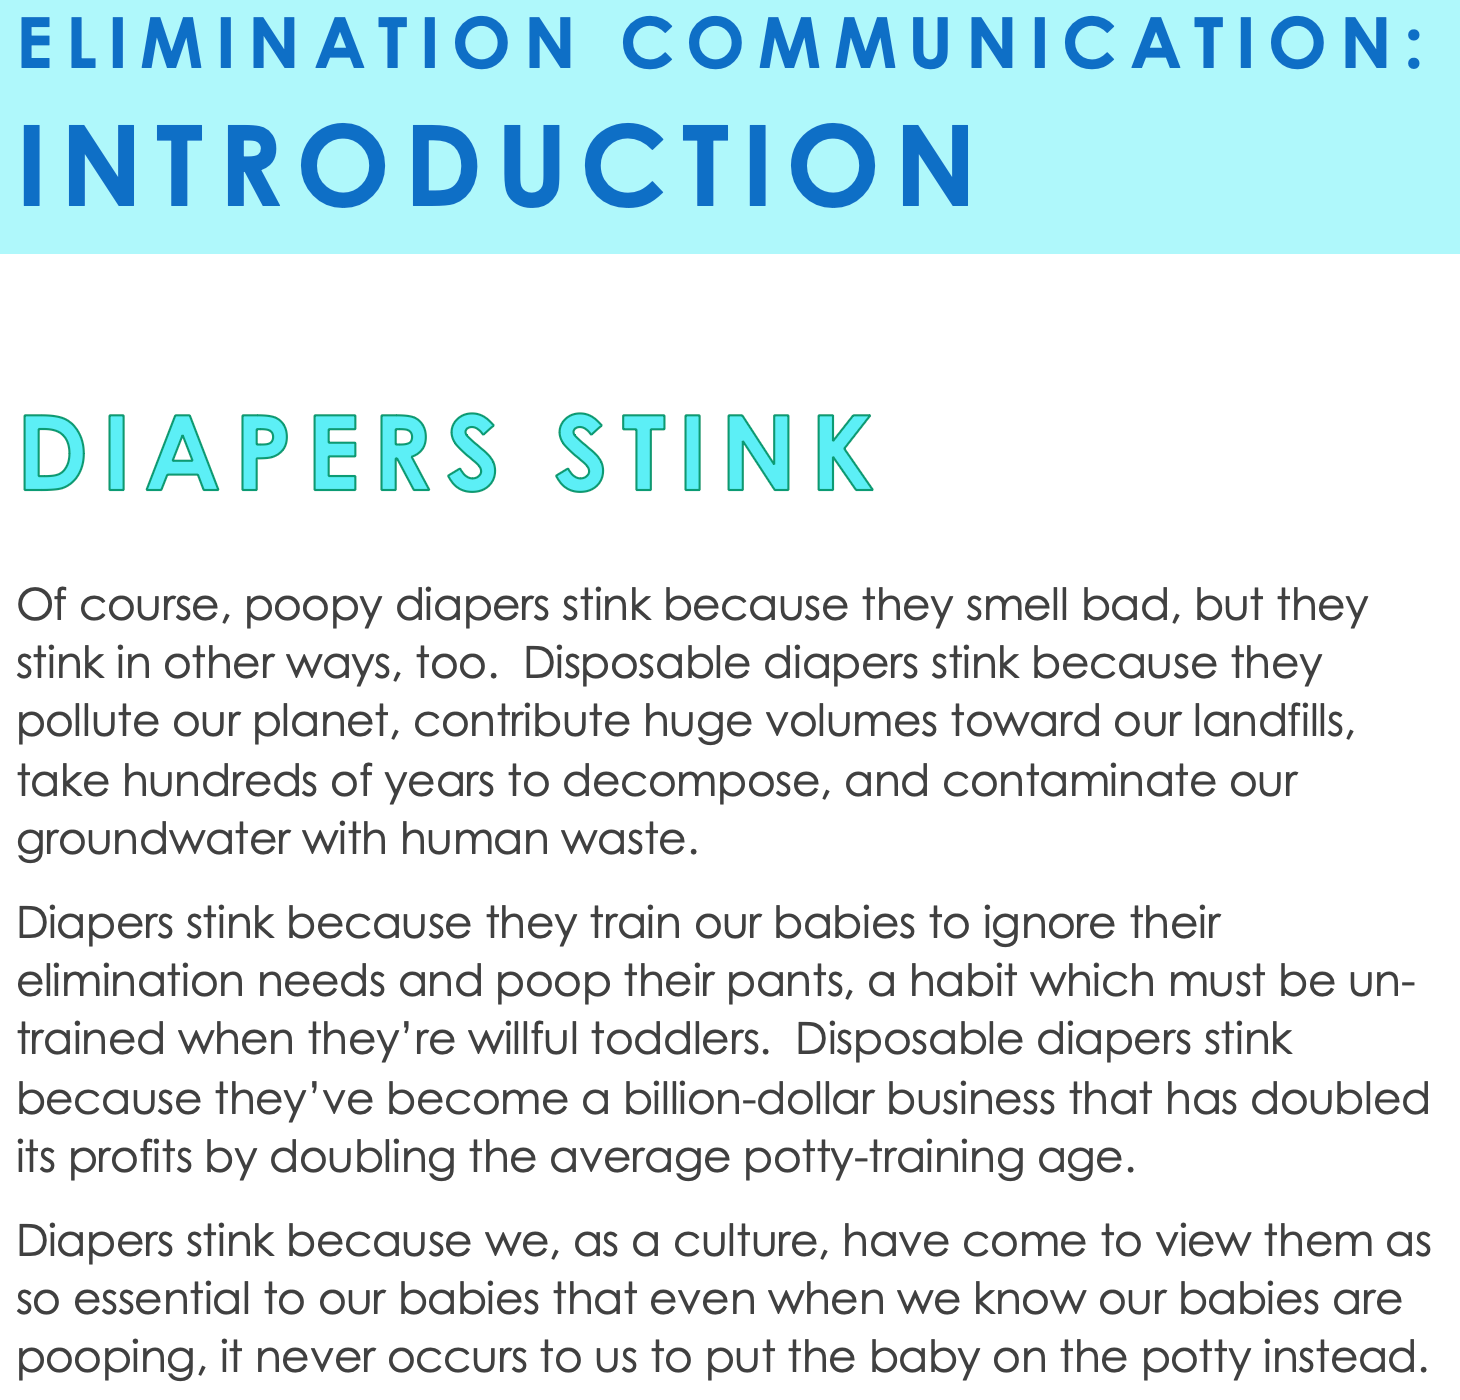 Diapers Stink! A Guide to Elimination Communication